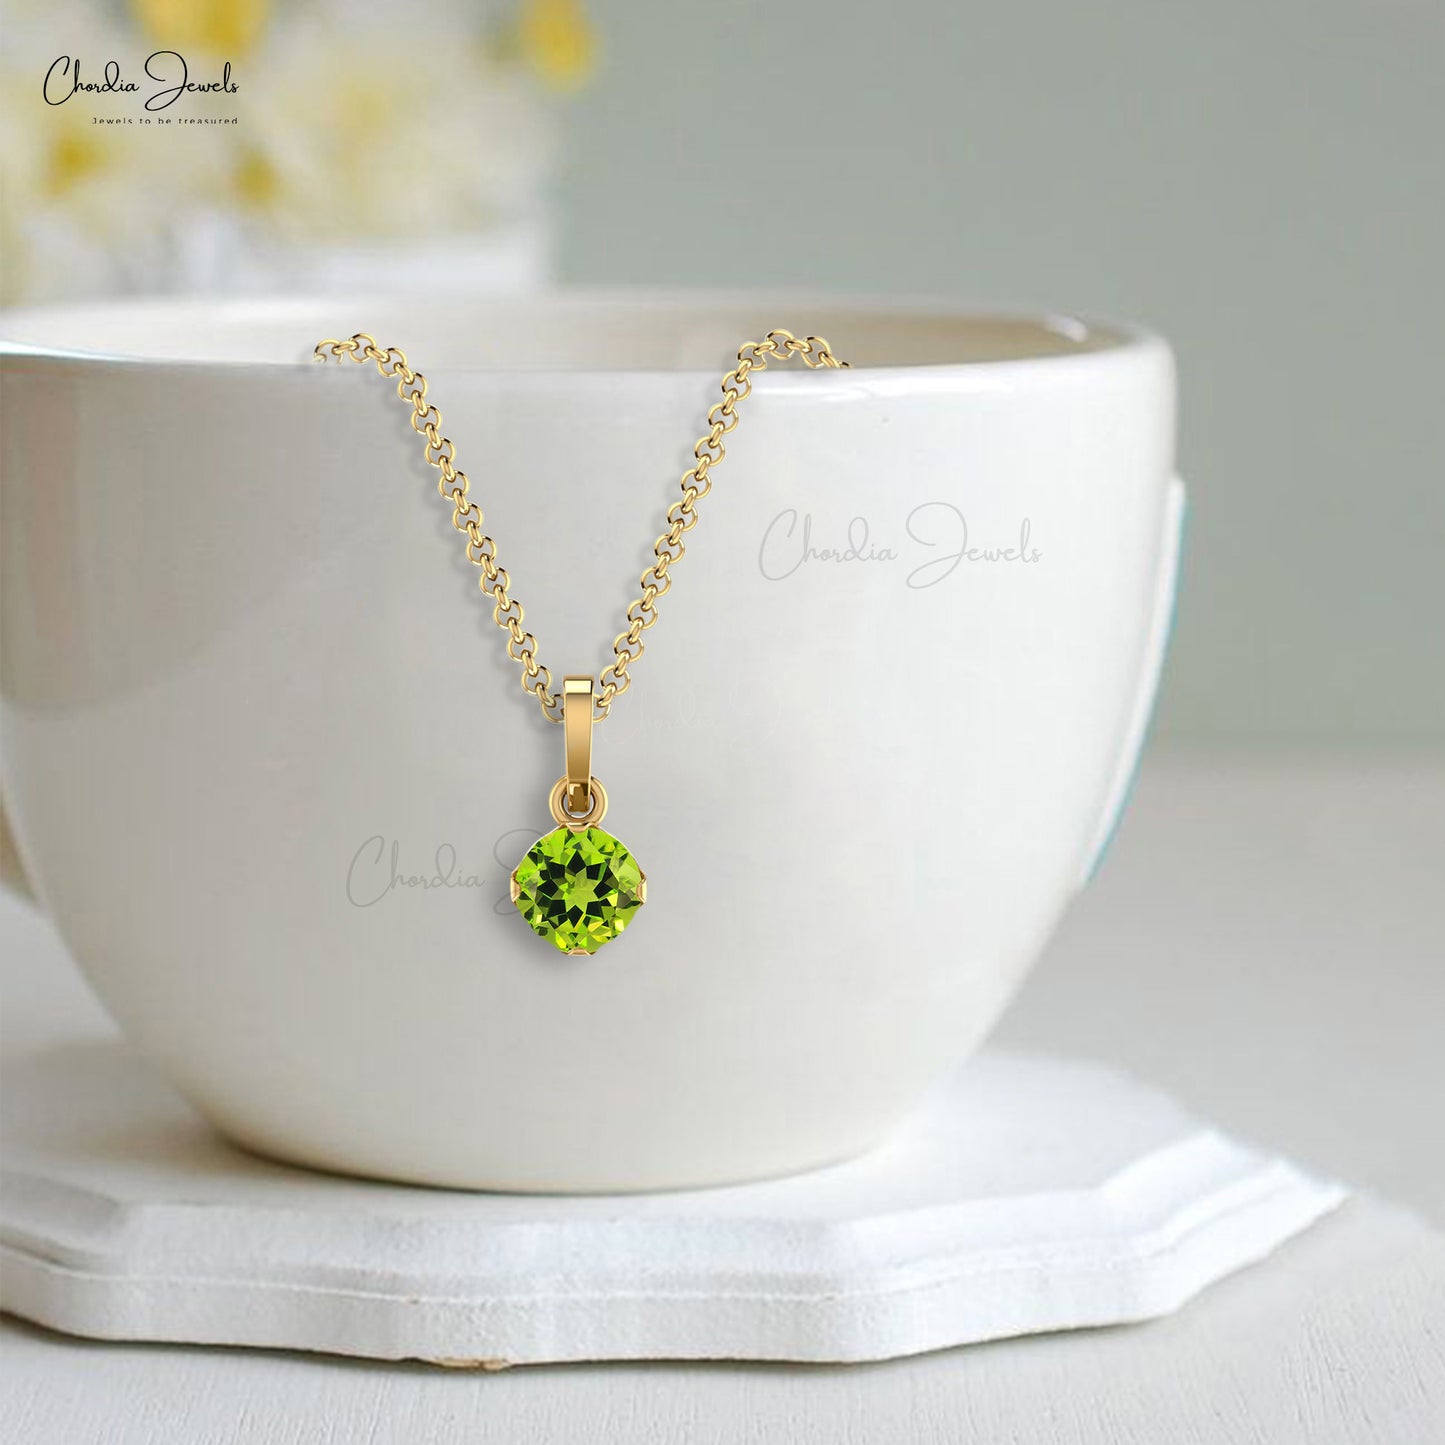 Natural Peridot Solitaire Pendant 14k Real Gold Hallmarked Pendant 4mm Round Cut Gemstone Pendant For Surprise Gift